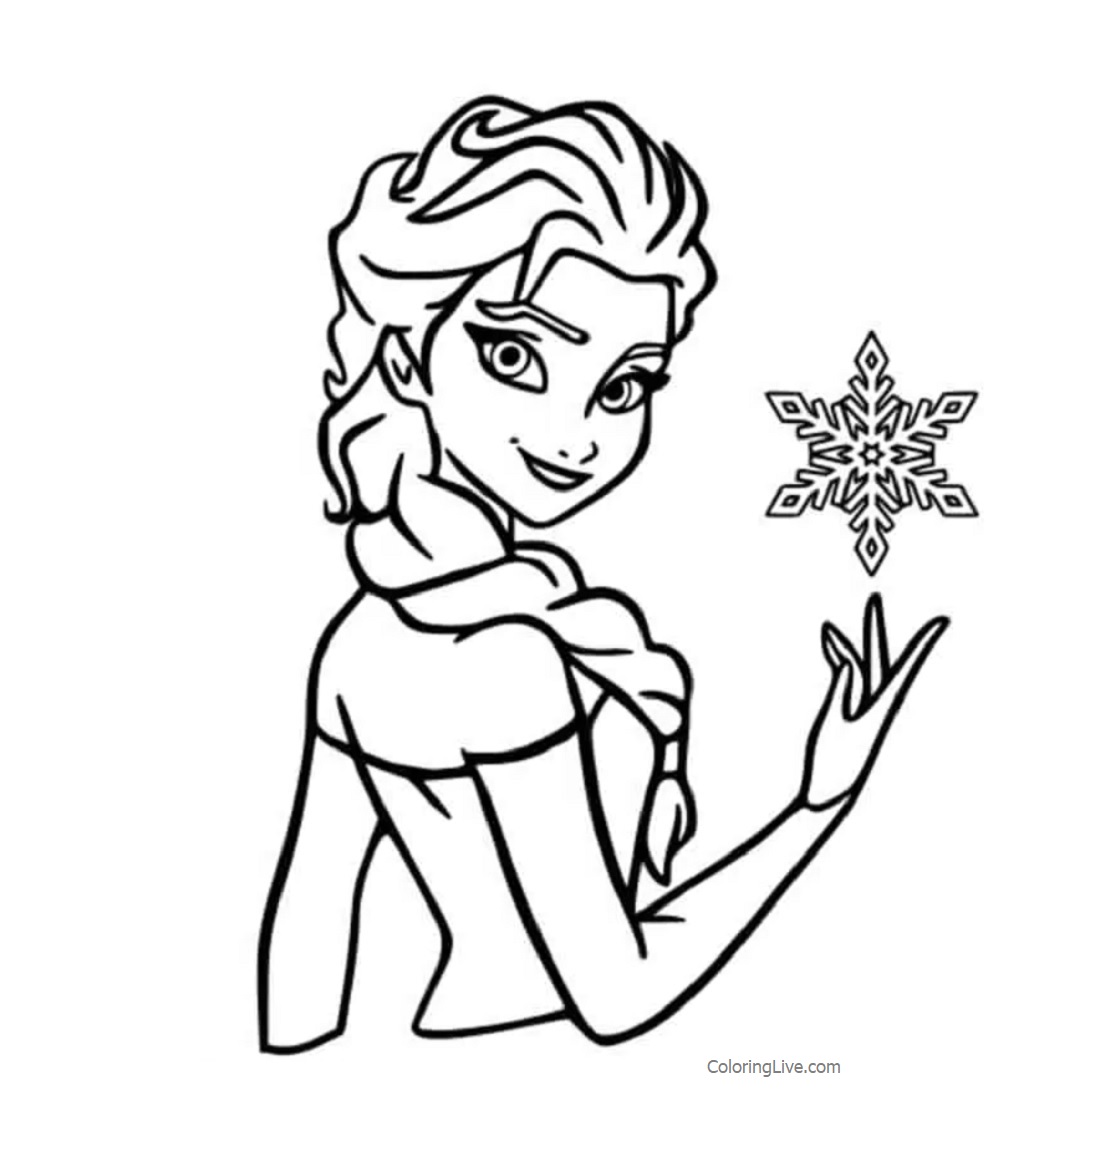 Printable Beautiful Frozen Coloring Page for kids.